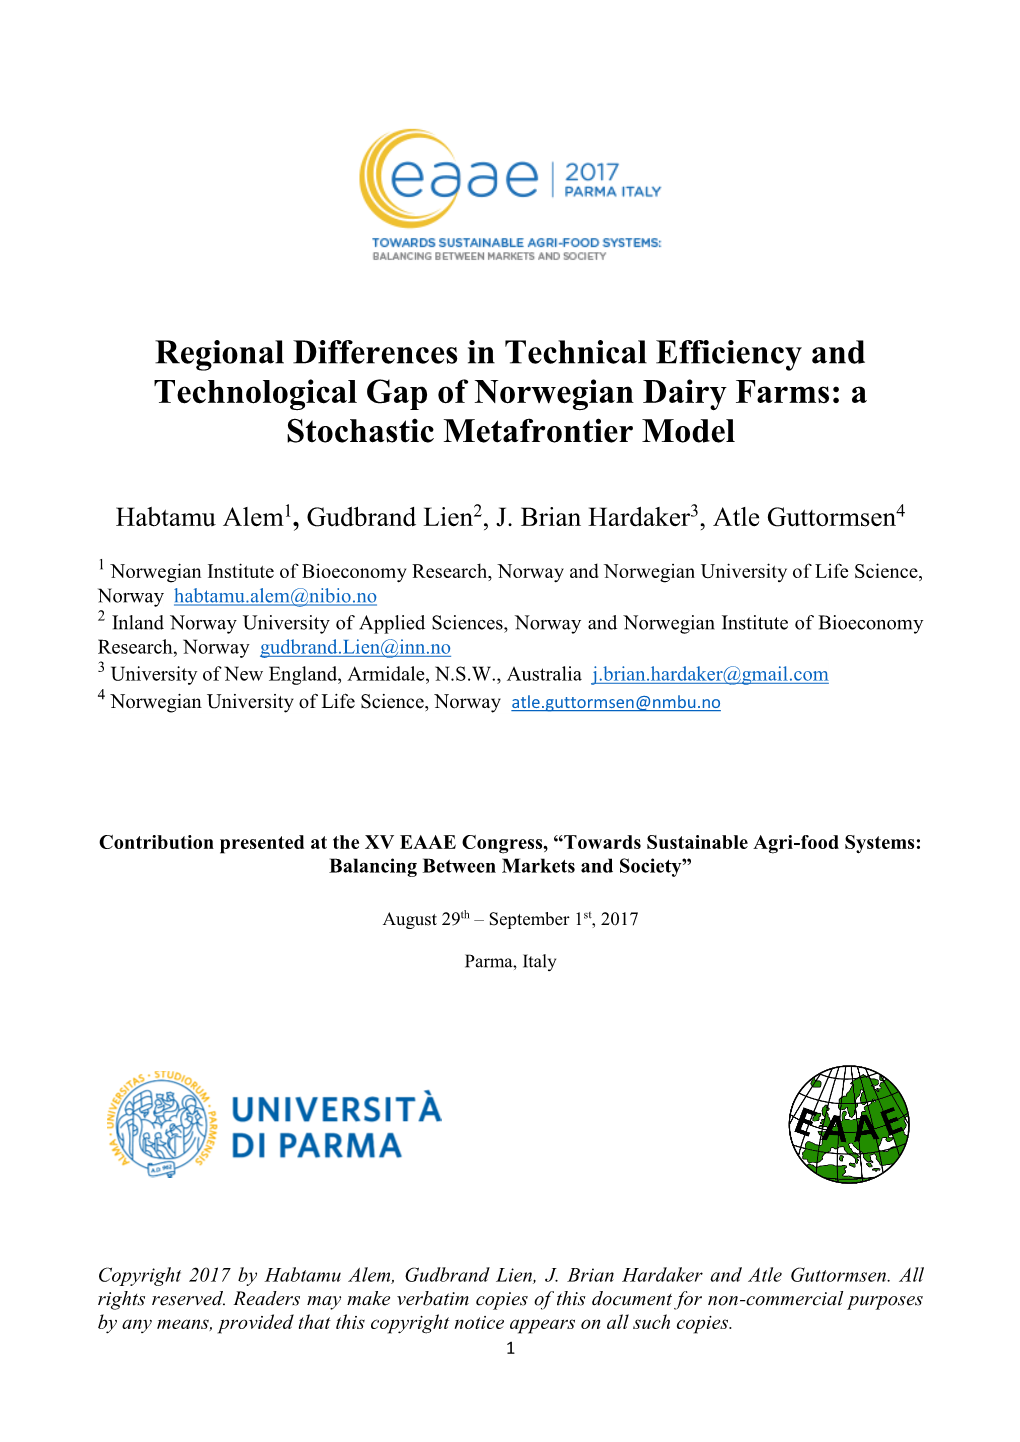 Regional Differences in Technical Efficiency and Technological Gap of Norwegian Dairy Farms: a Stochastic Metafrontier Model